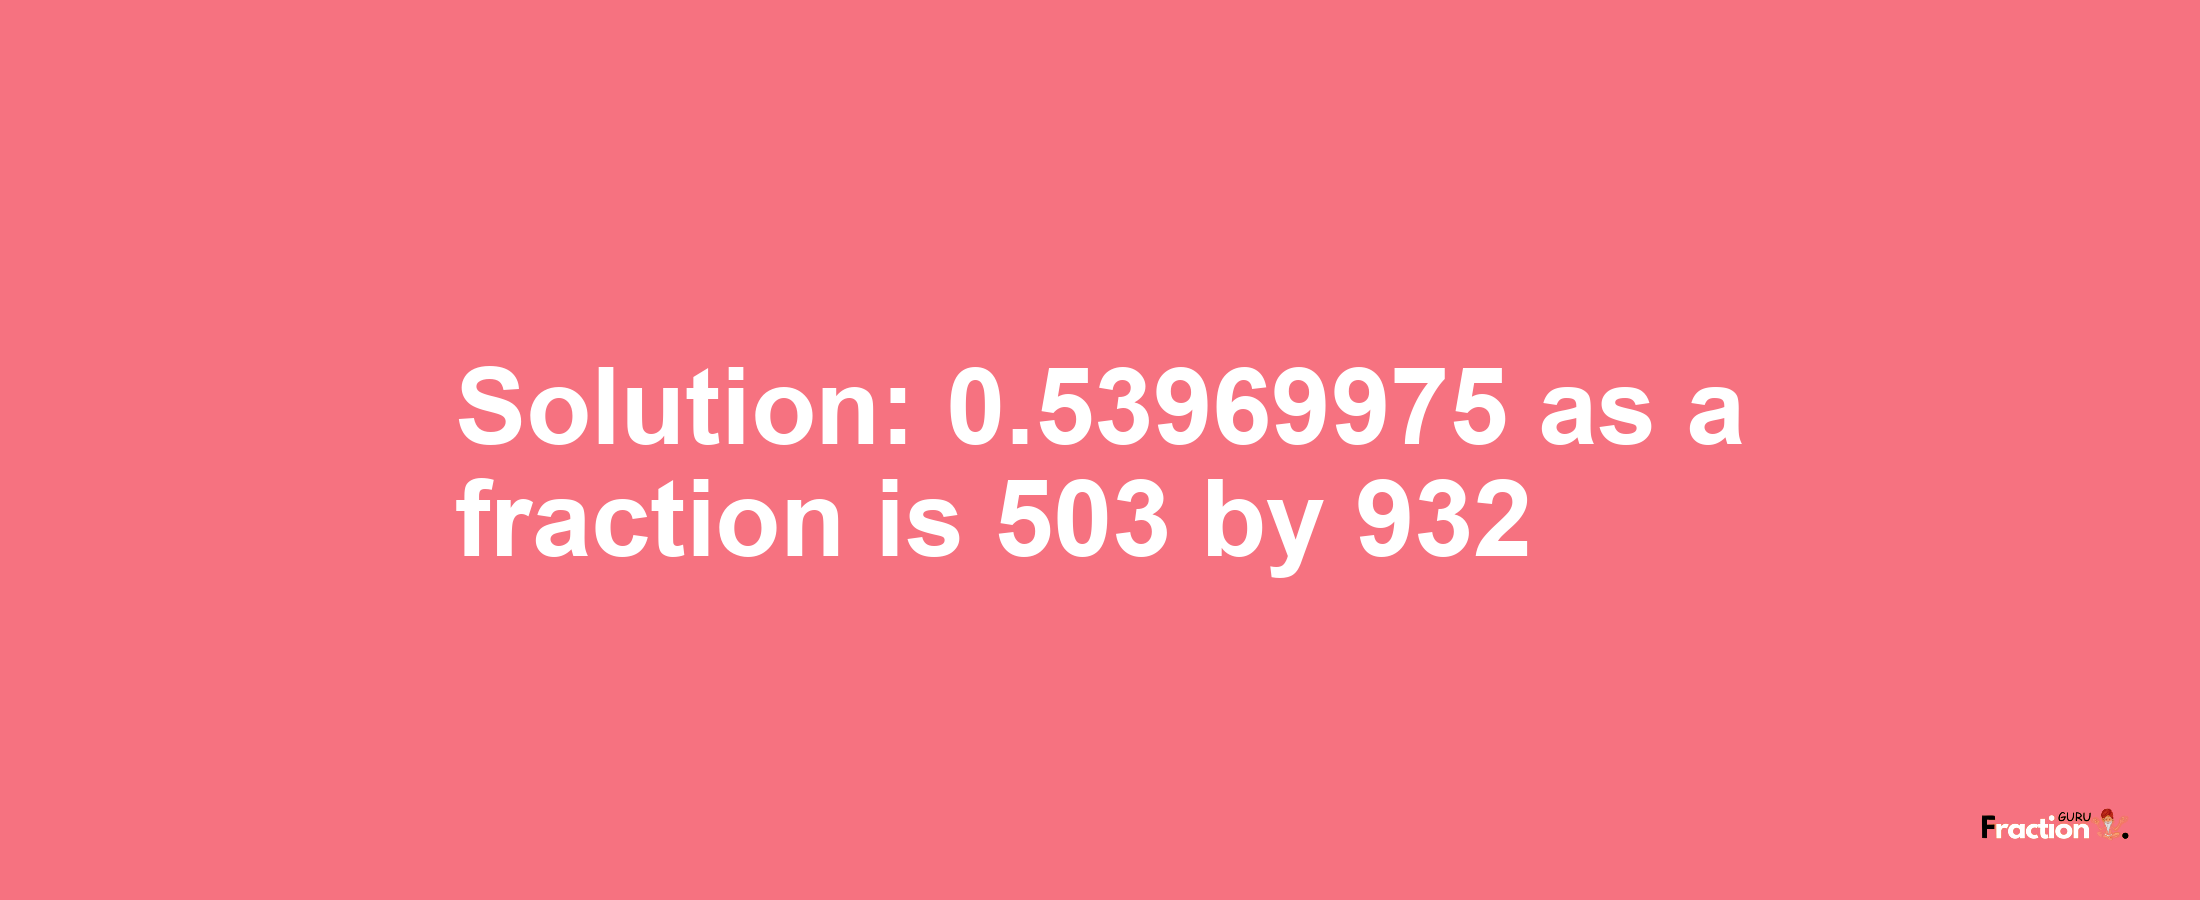 Solution:0.53969975 as a fraction is 503/932